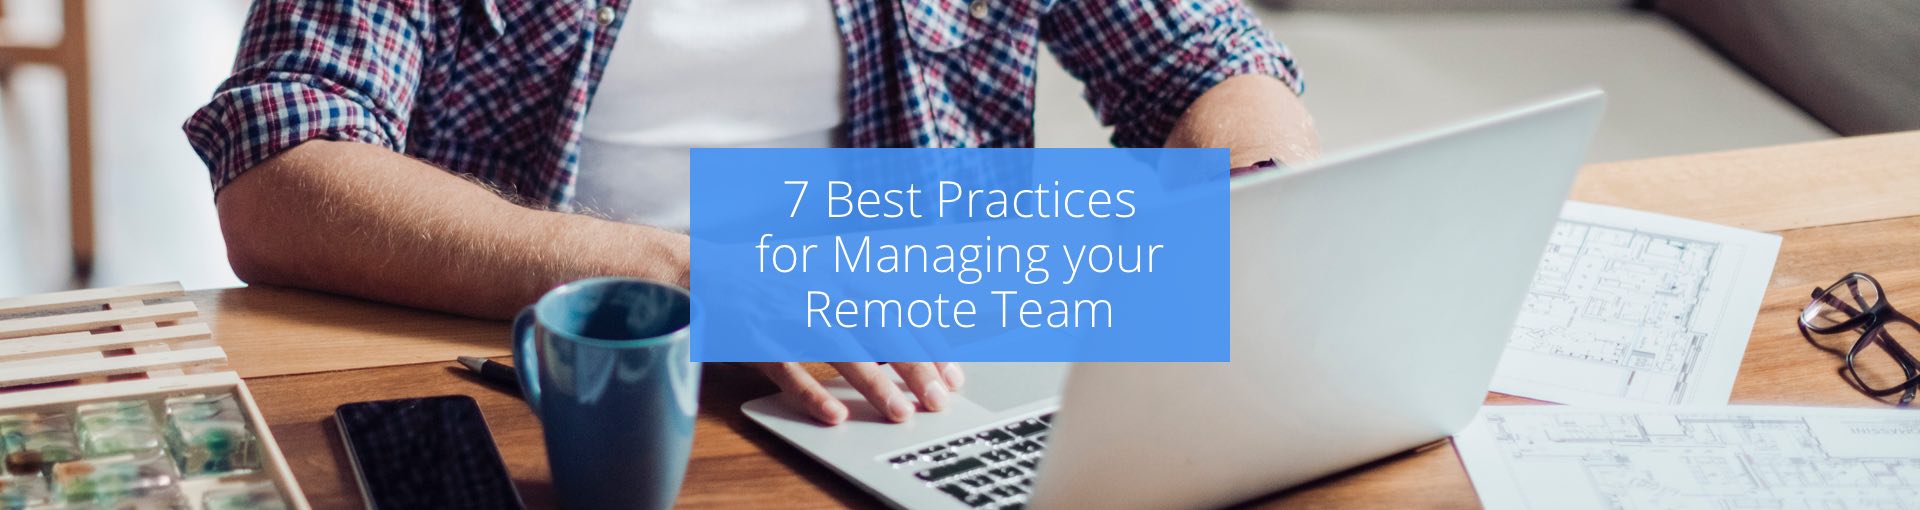 7 Best Practices for Managing Your Remote Team Featured Image